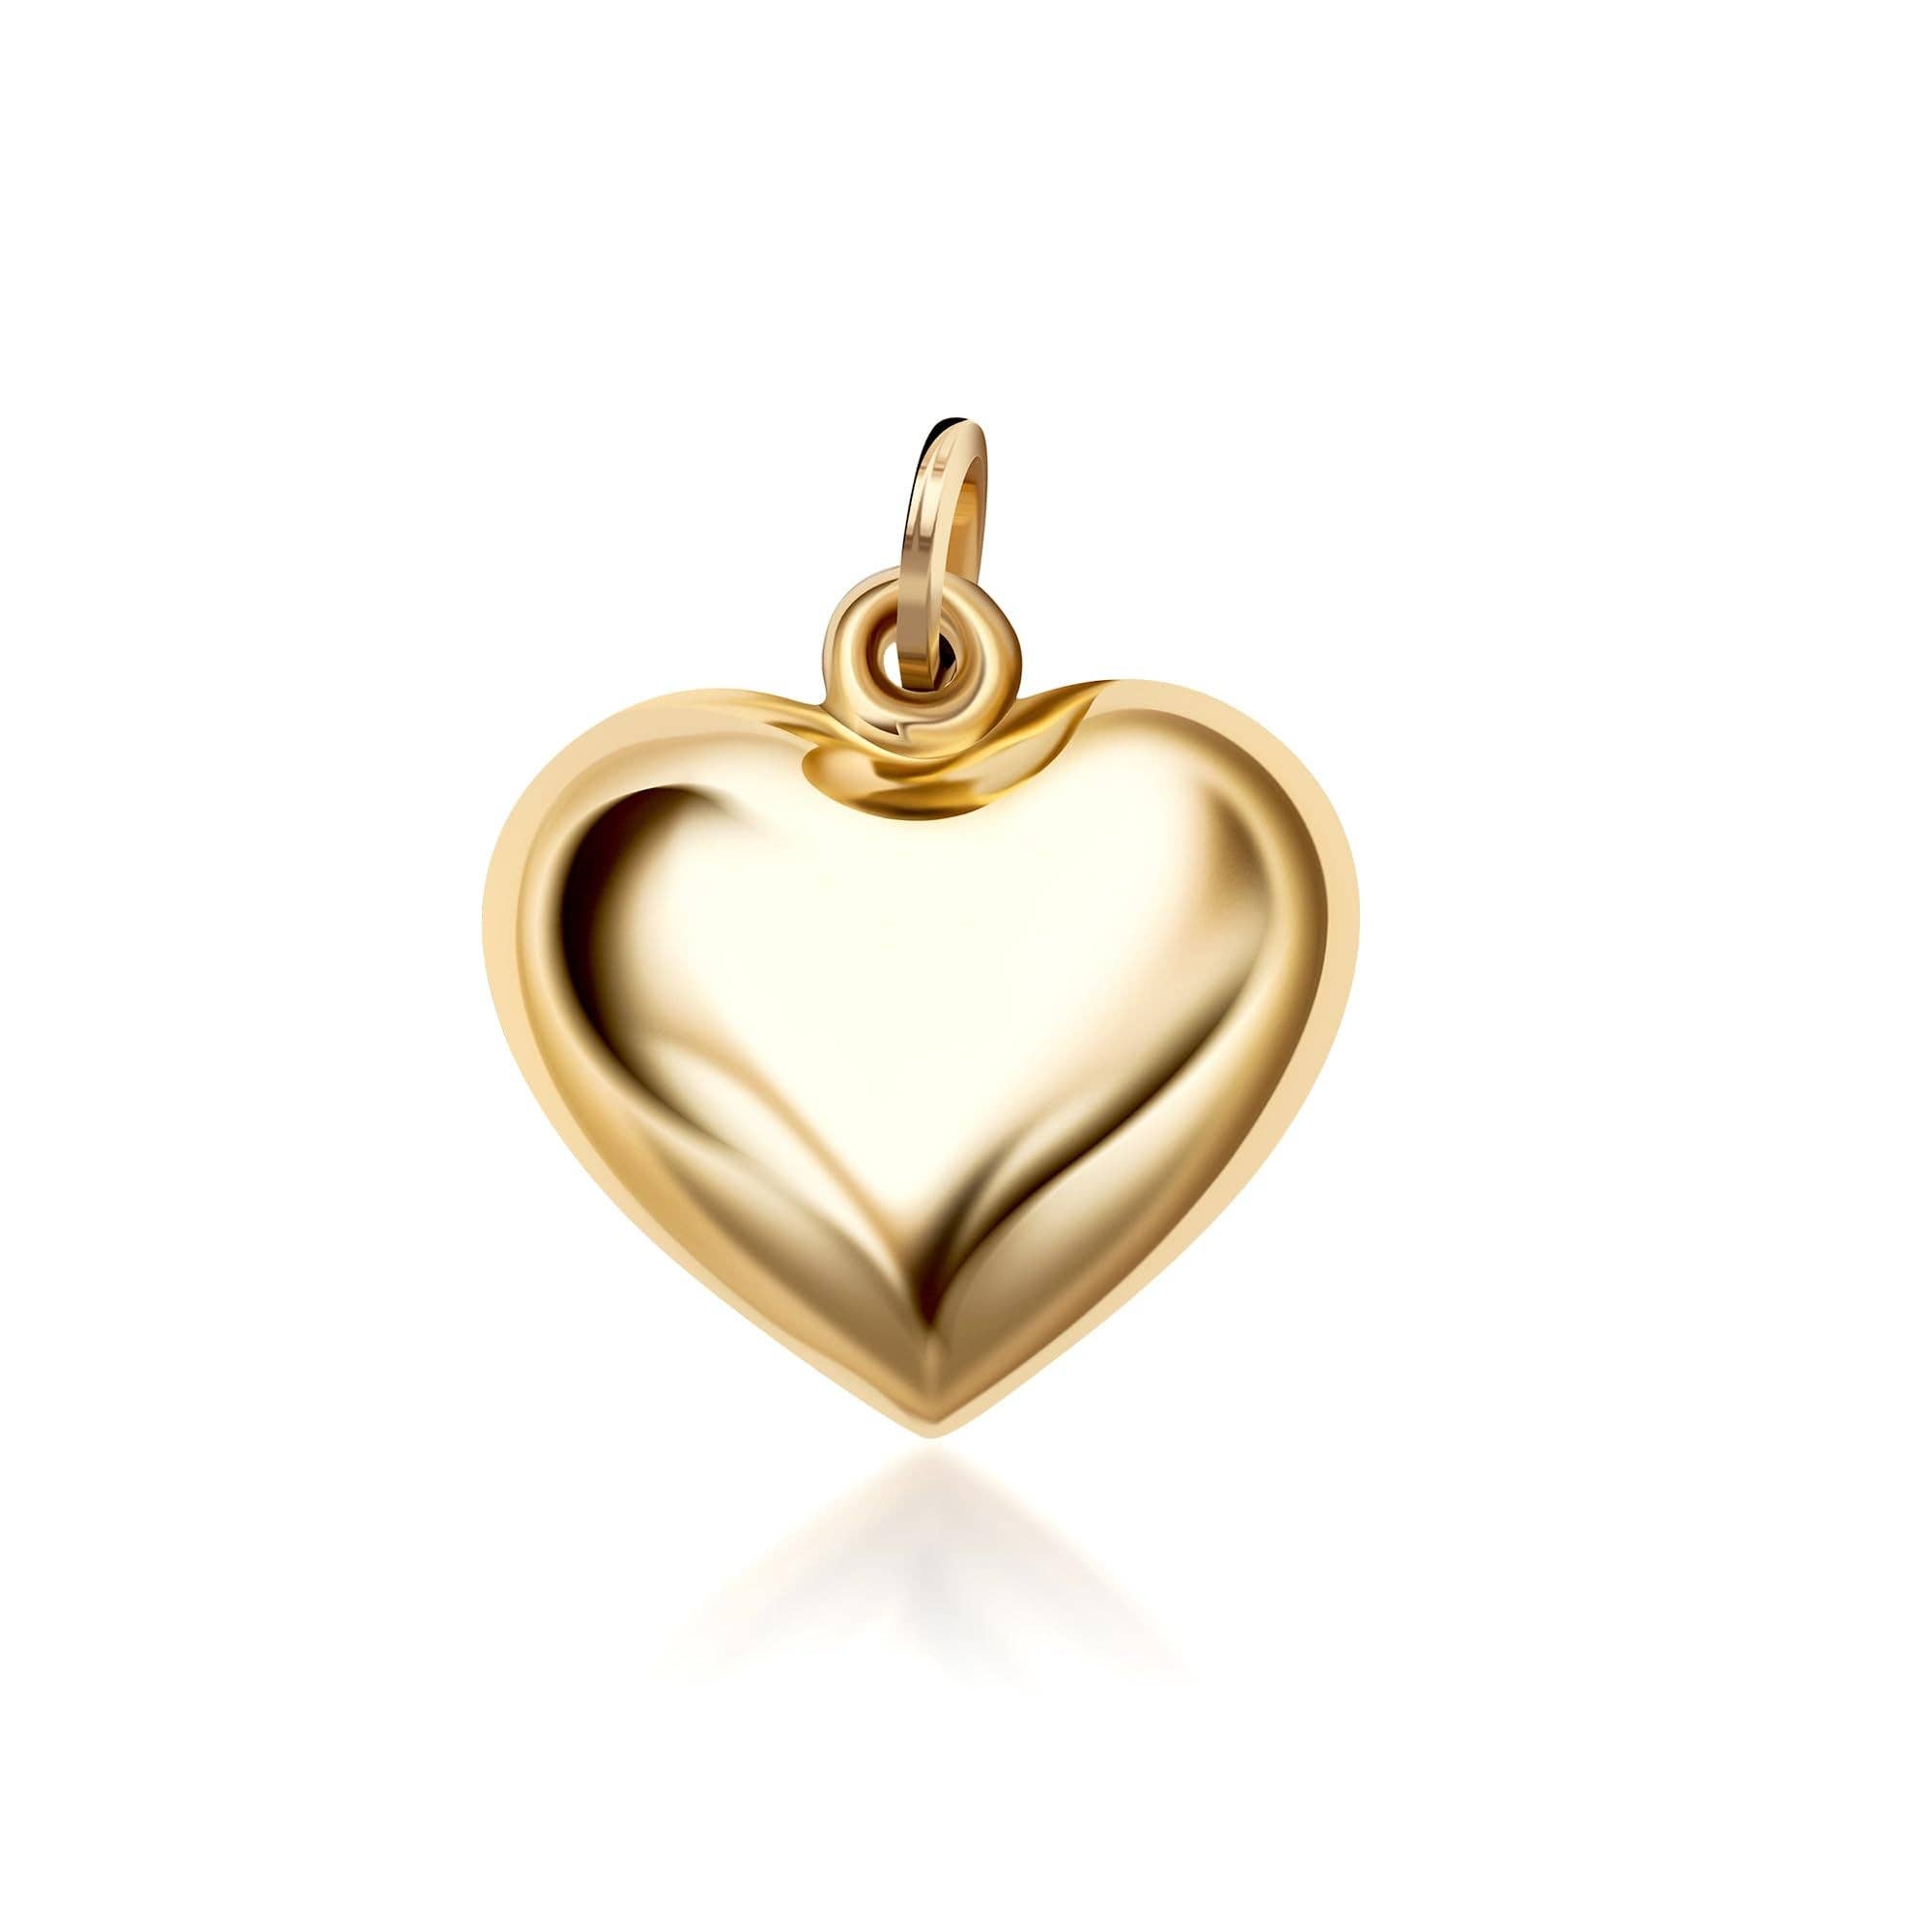 Wholesale 14K Solid Gold Puff Heart Charm Pendant for your store